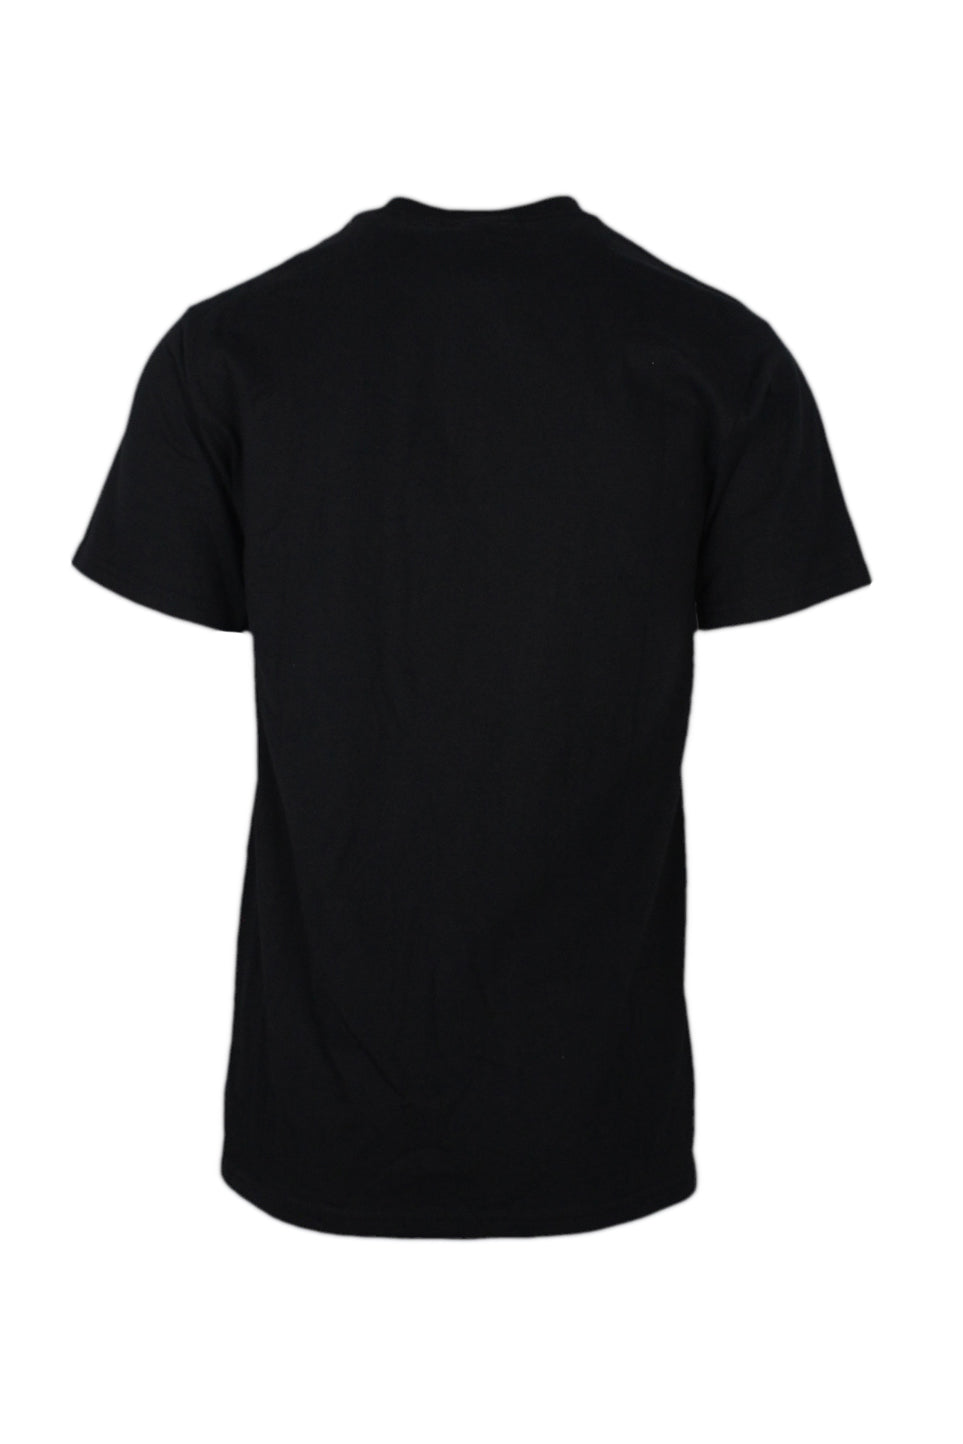 rear view with ribbed collar of shirt.